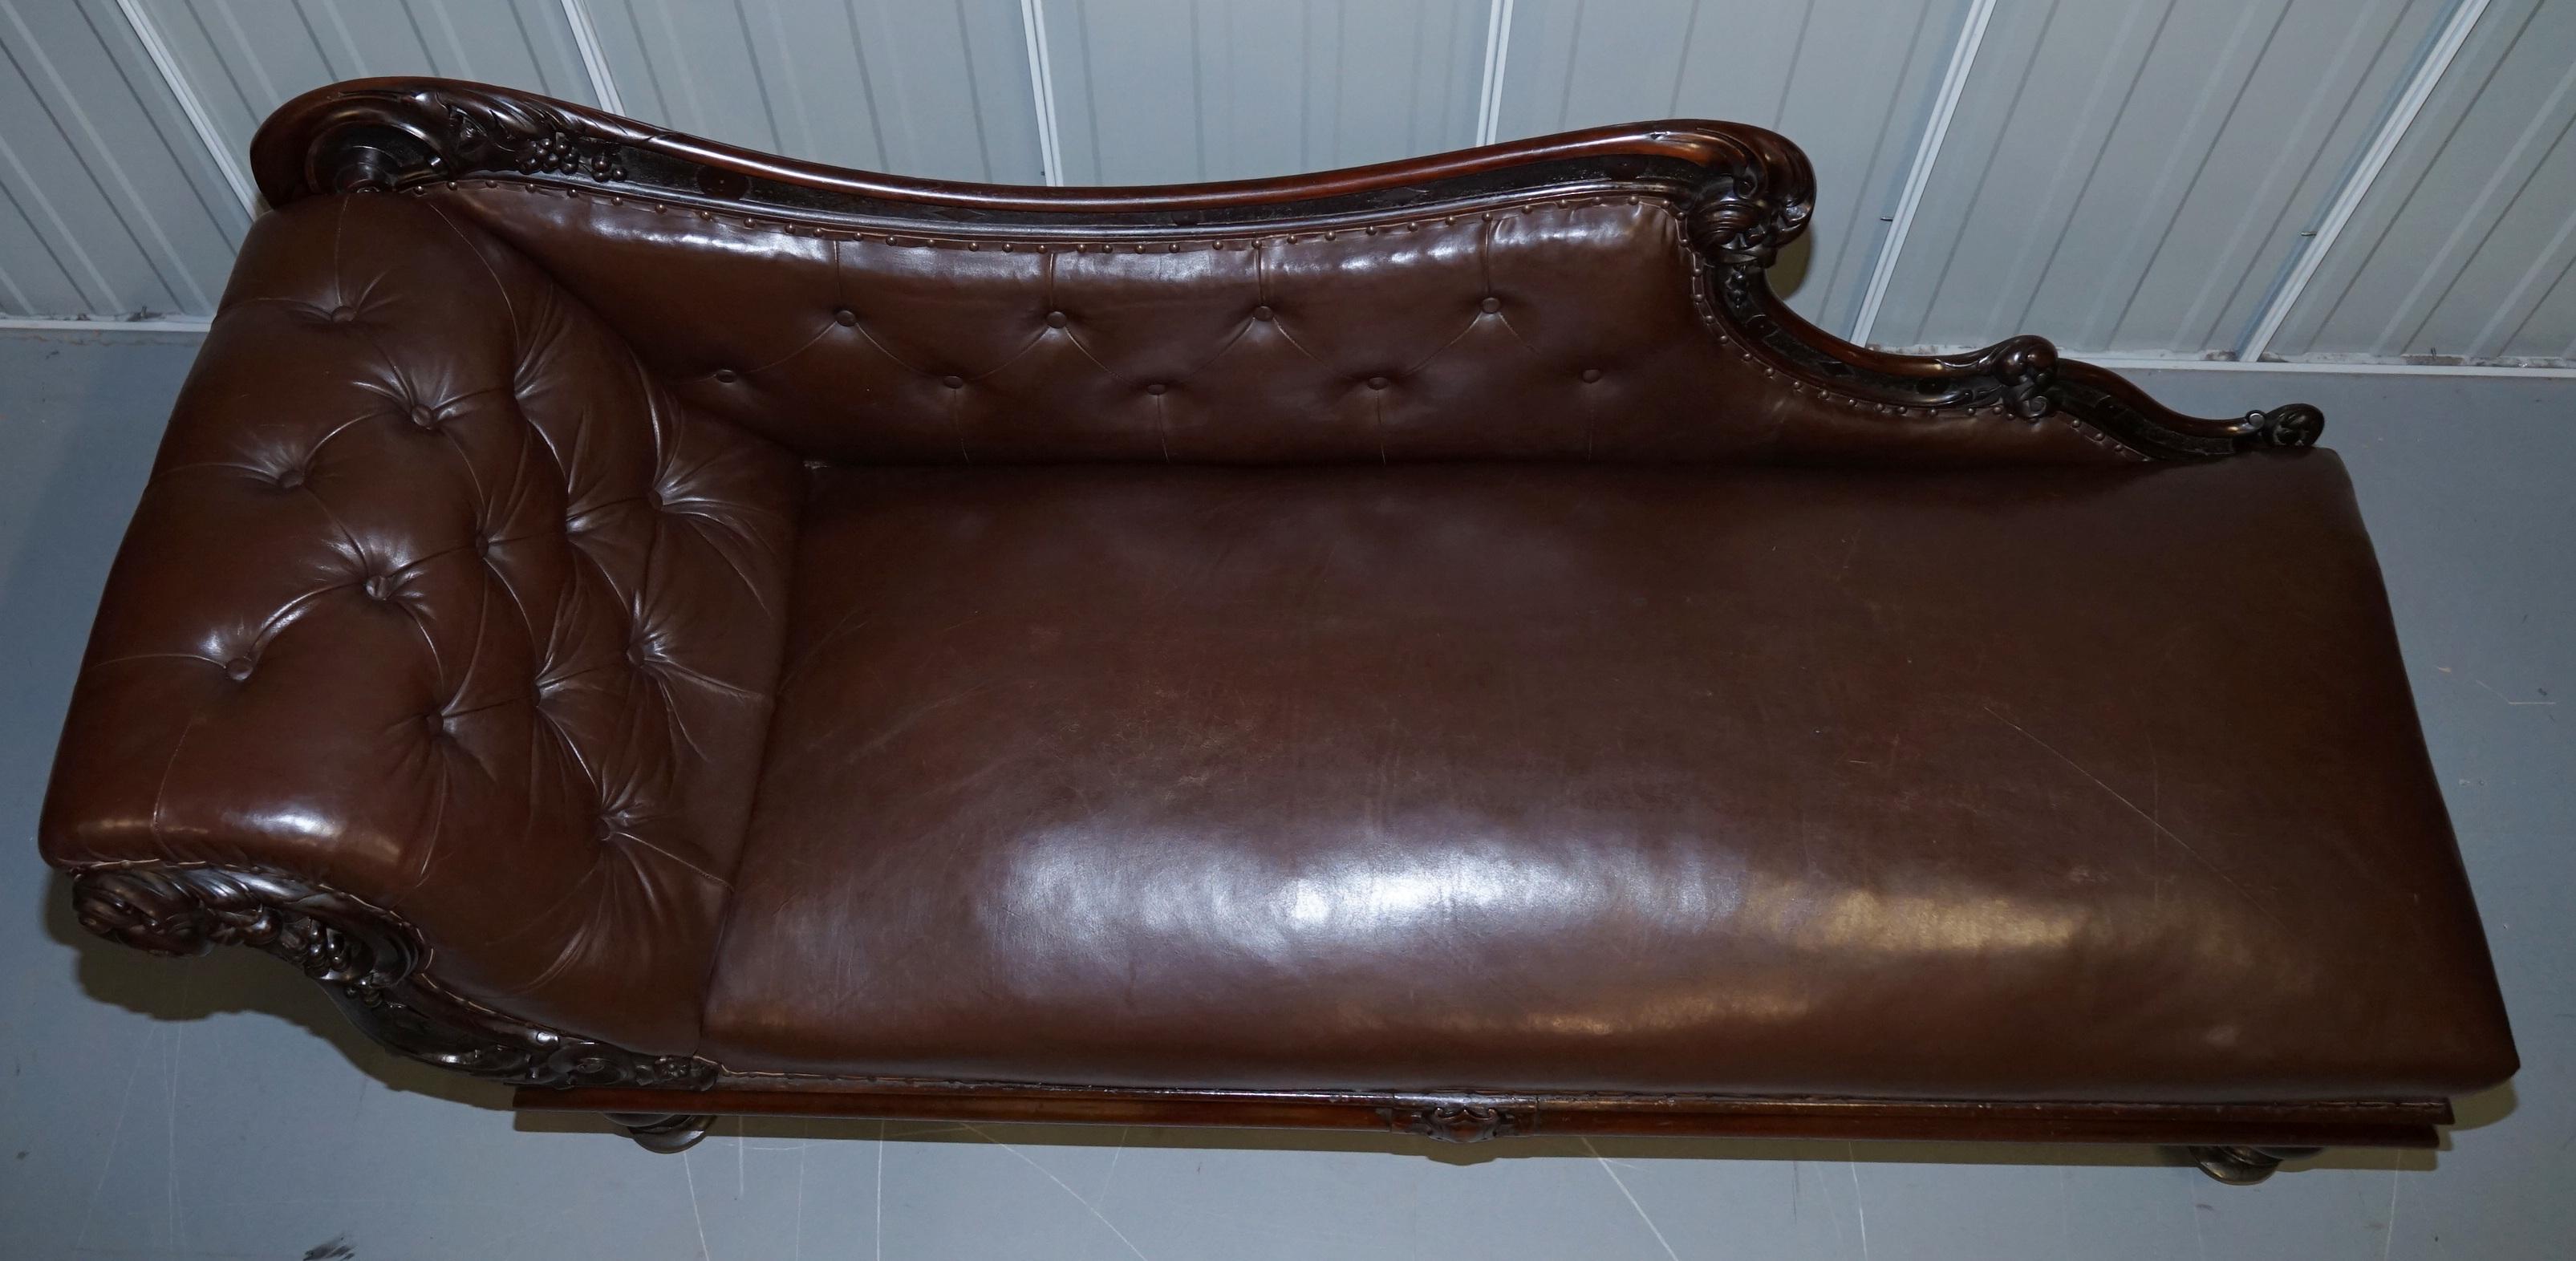 Regency Mahogany & Brown Leather Chesterfield Buttoned Chaise Lounge Sofa Chair 3